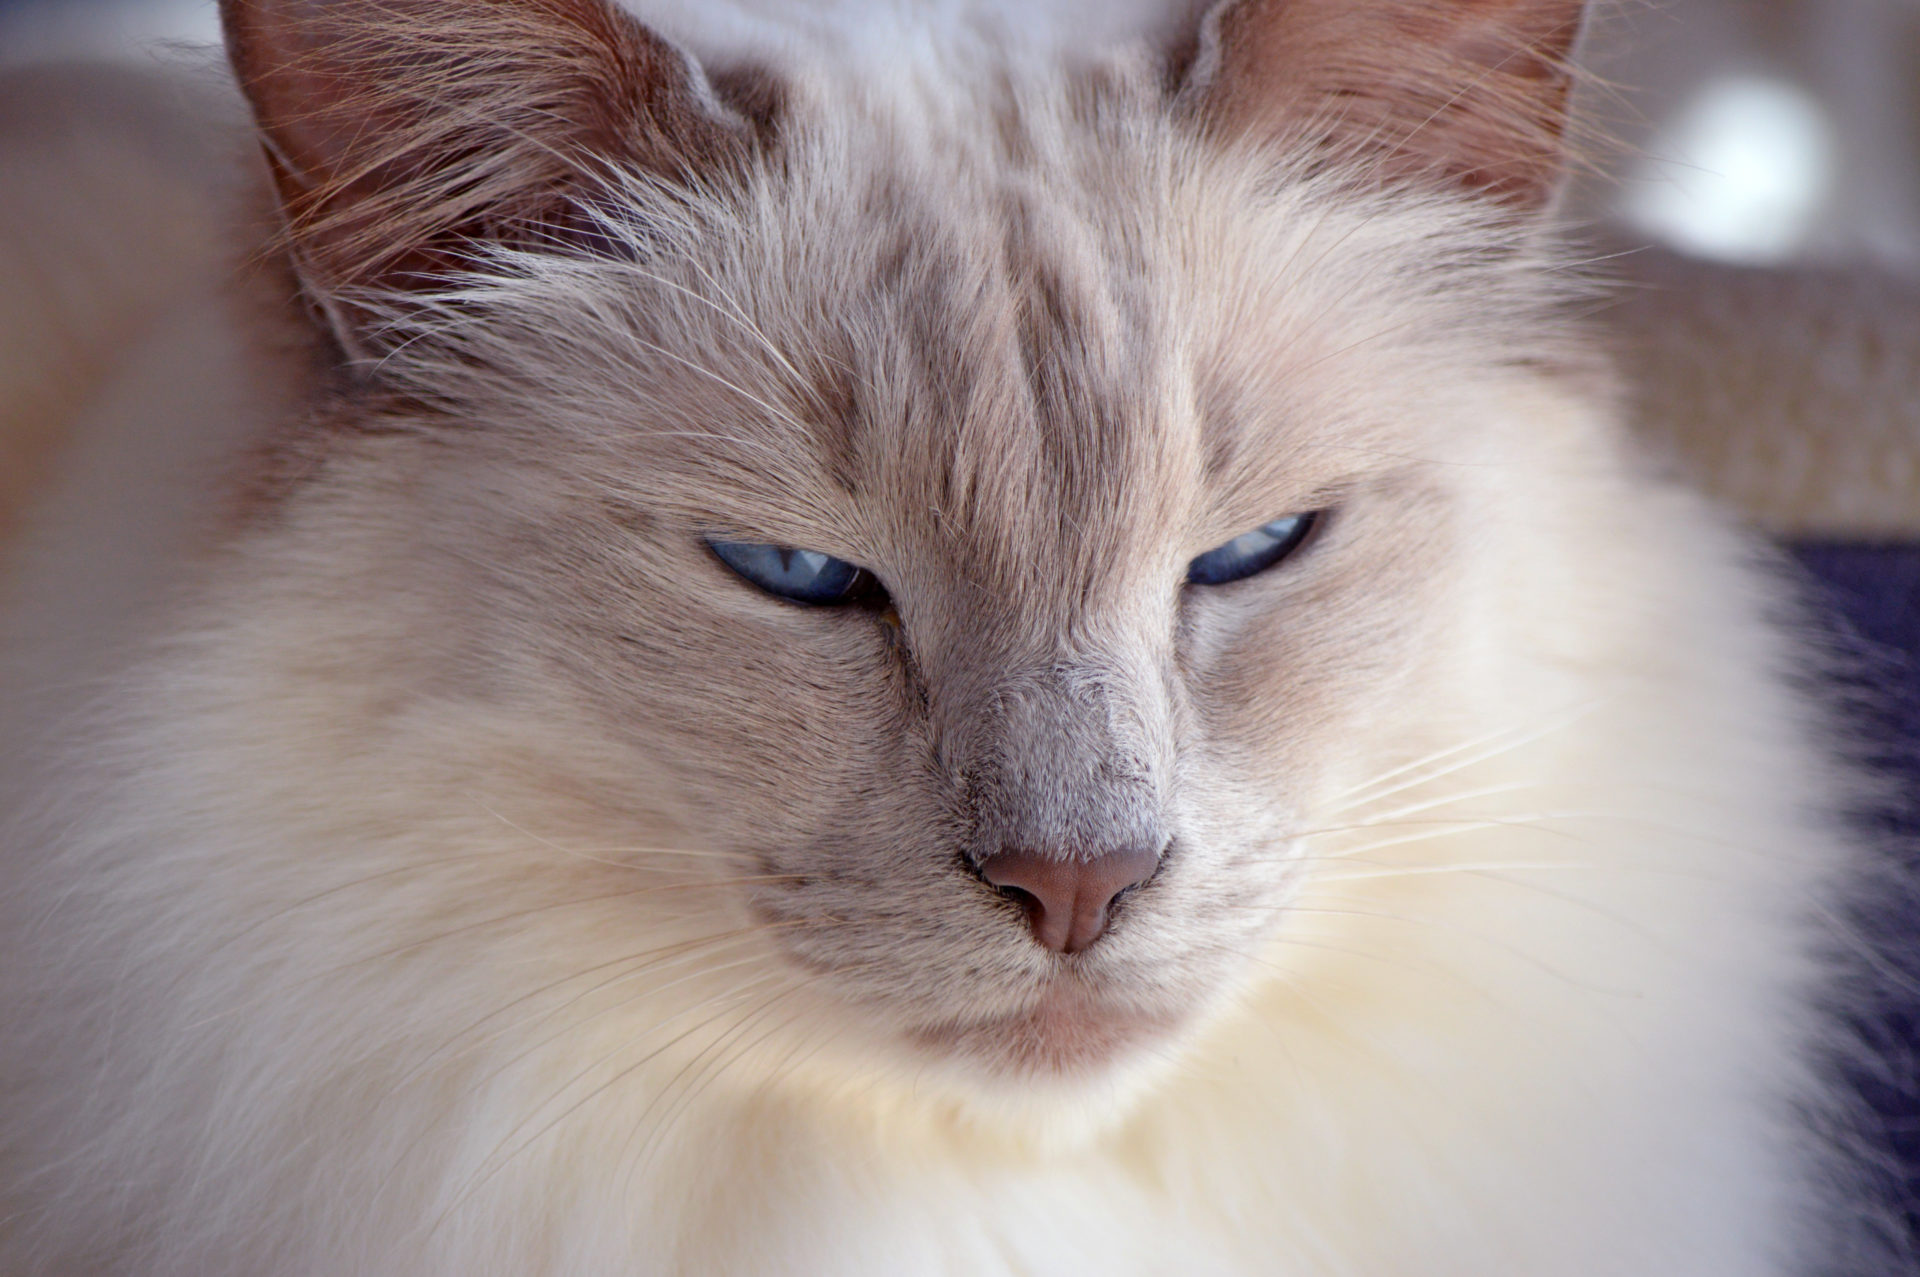 A Balinese cat breed